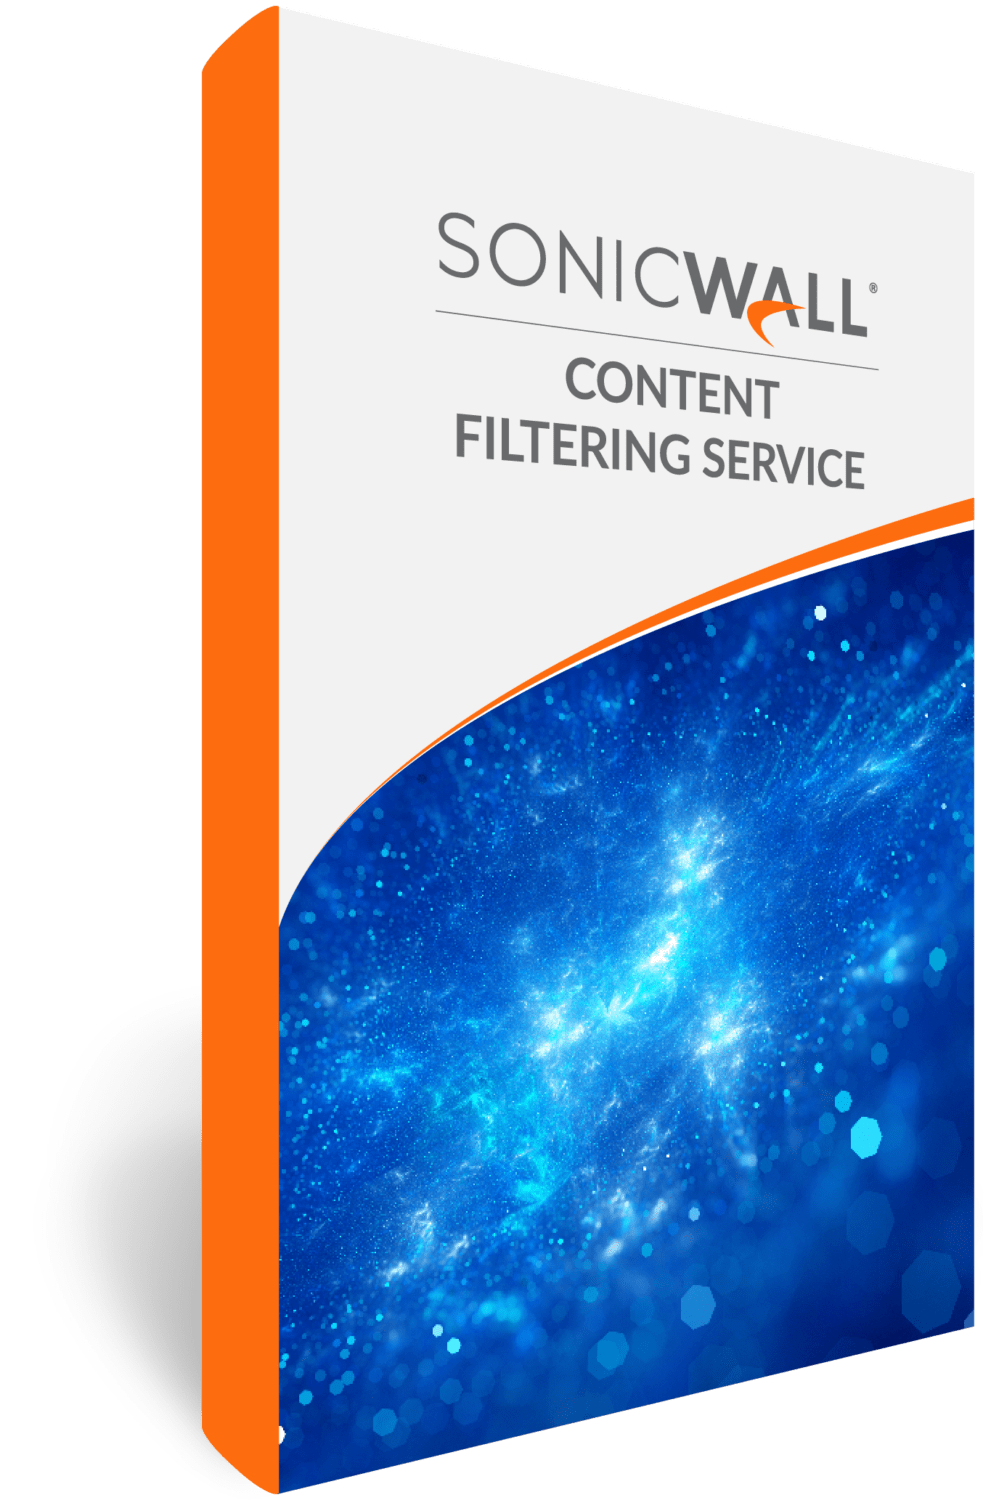 Sonicwall content filtering